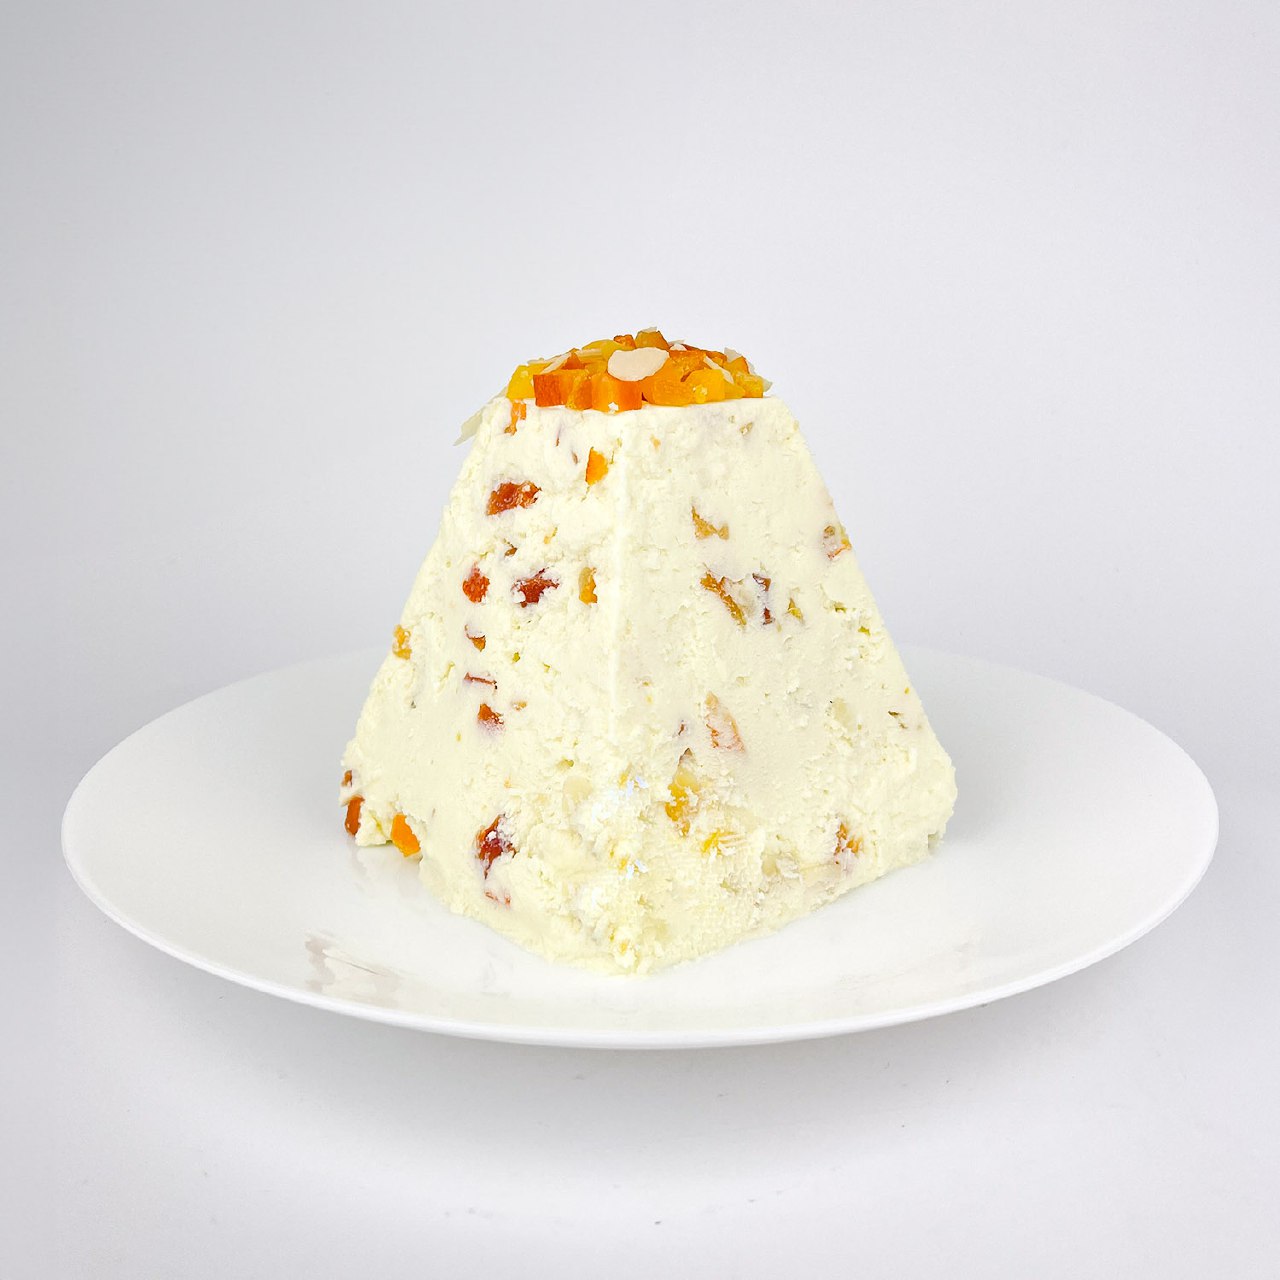 Easter cottage cheese with candied fruits and dried fruits